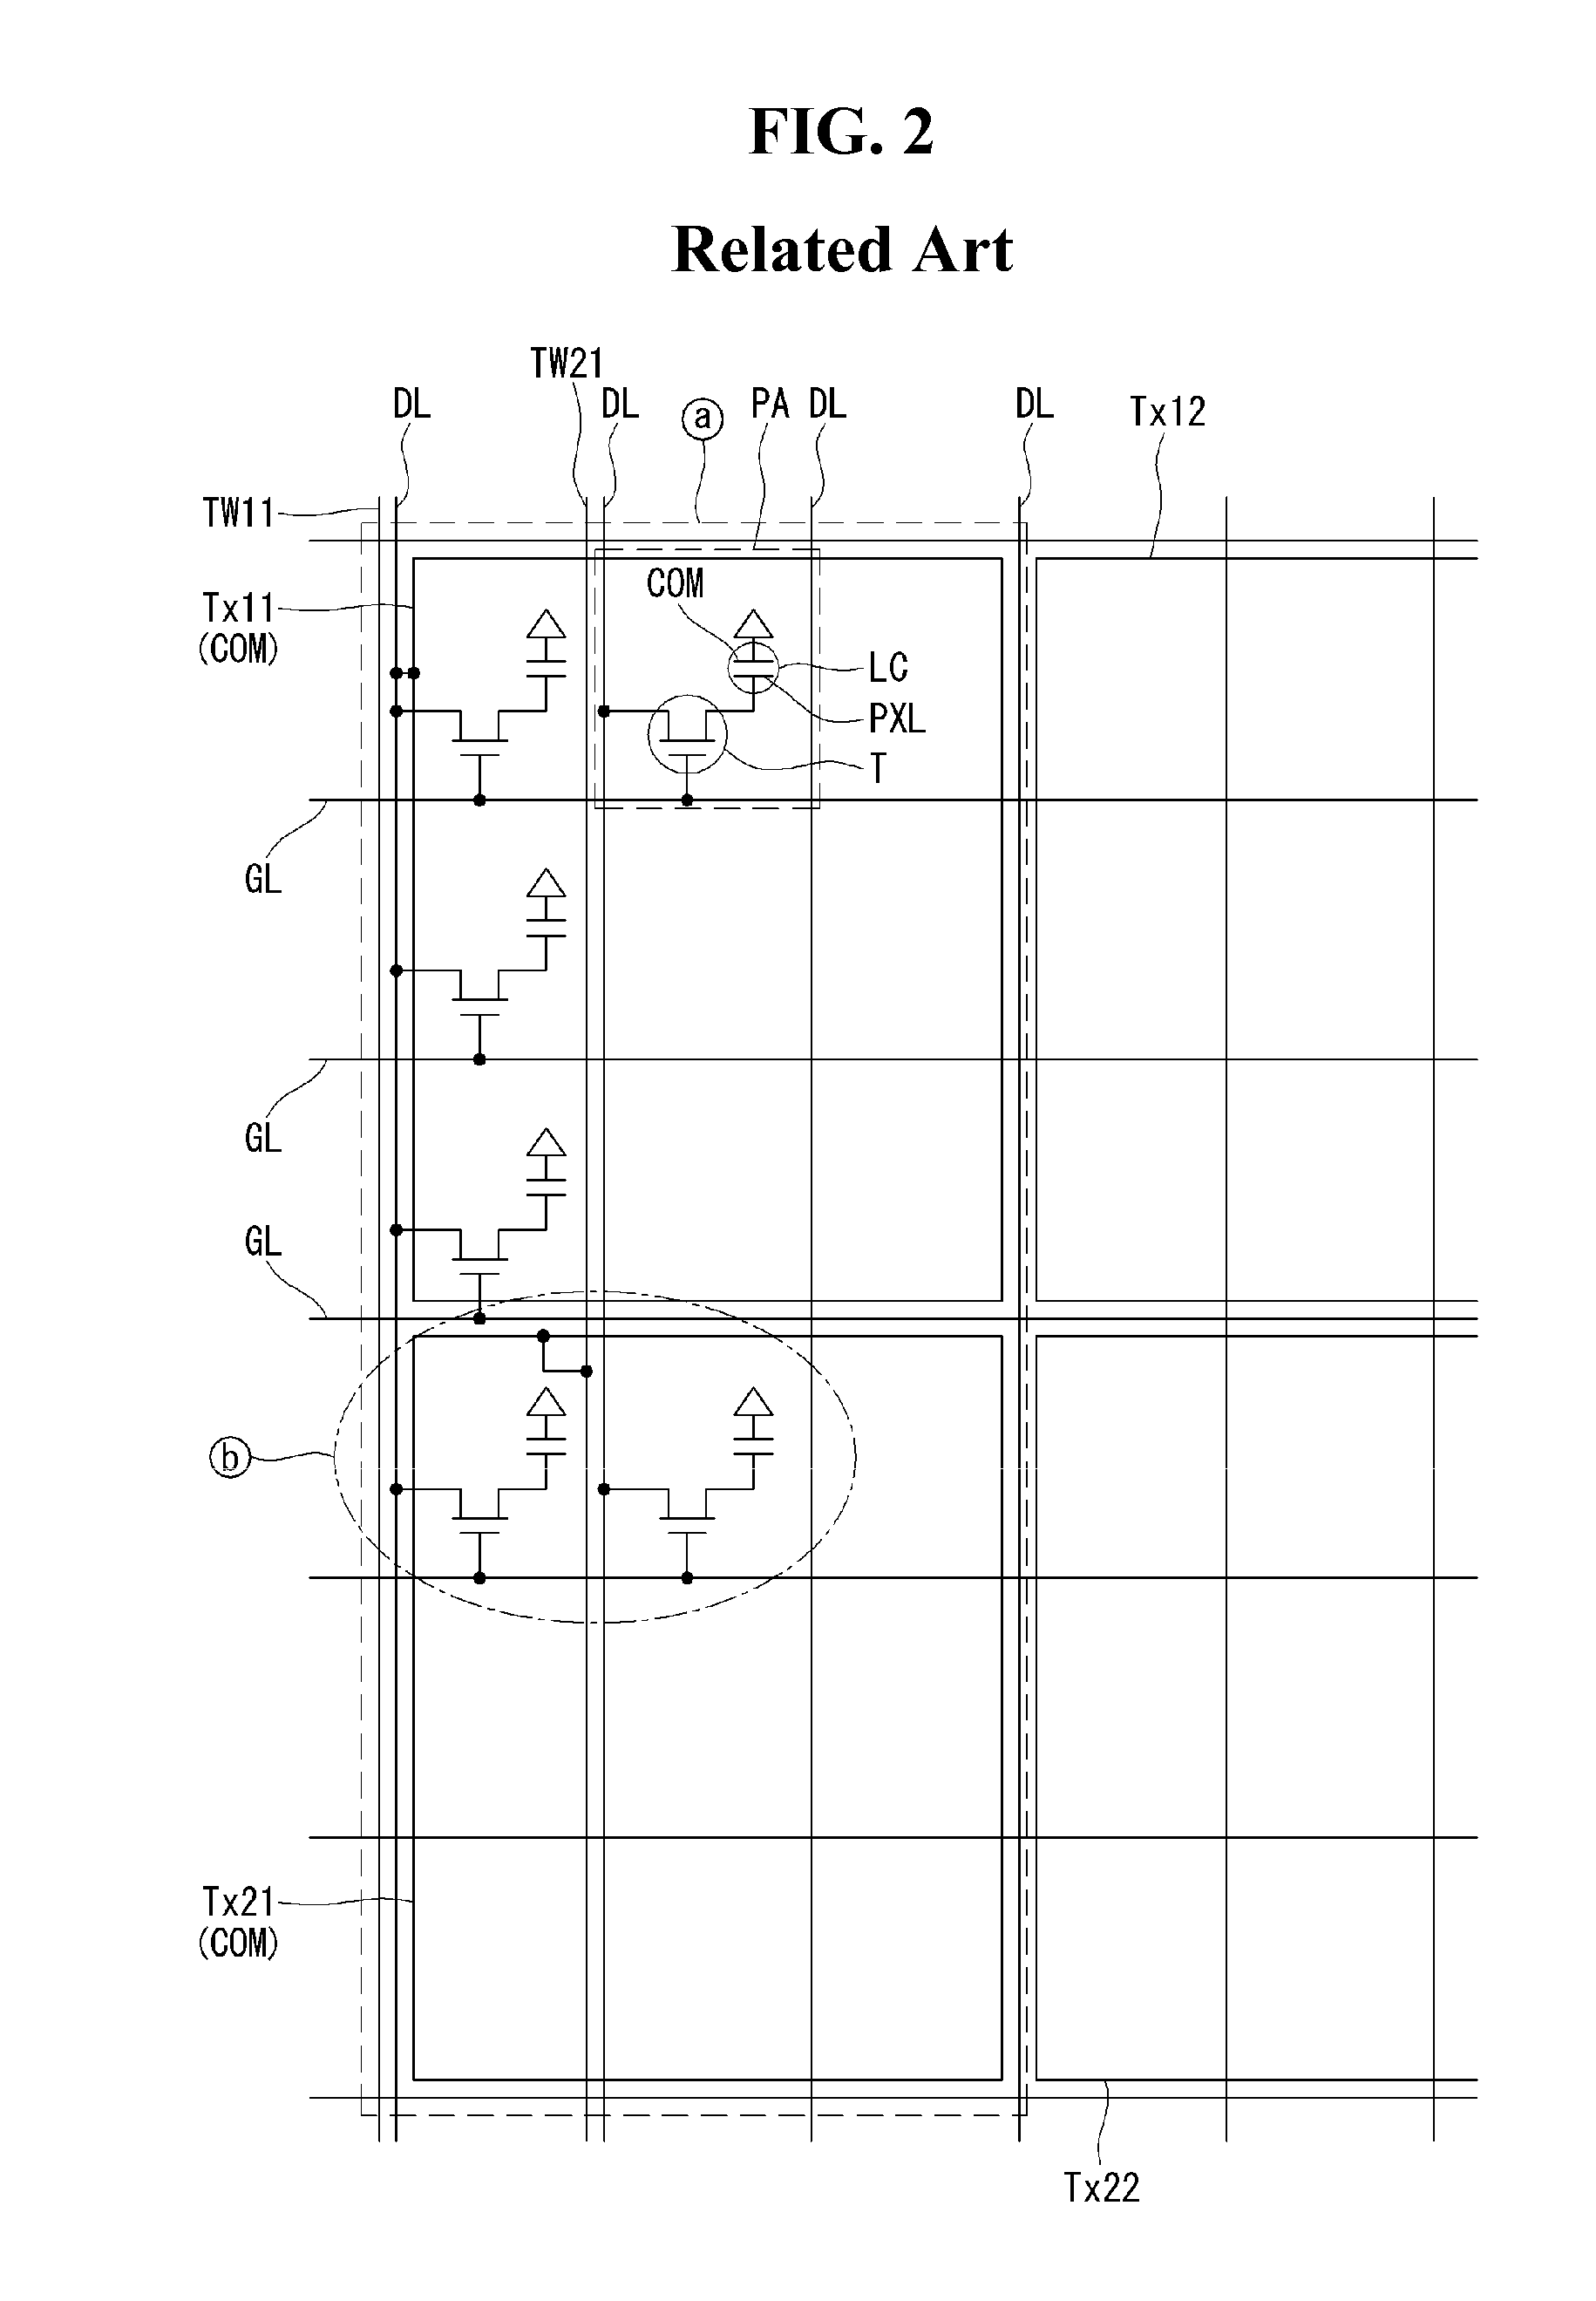 Ultra high resolution flat panel display having in-cell type touch sensor